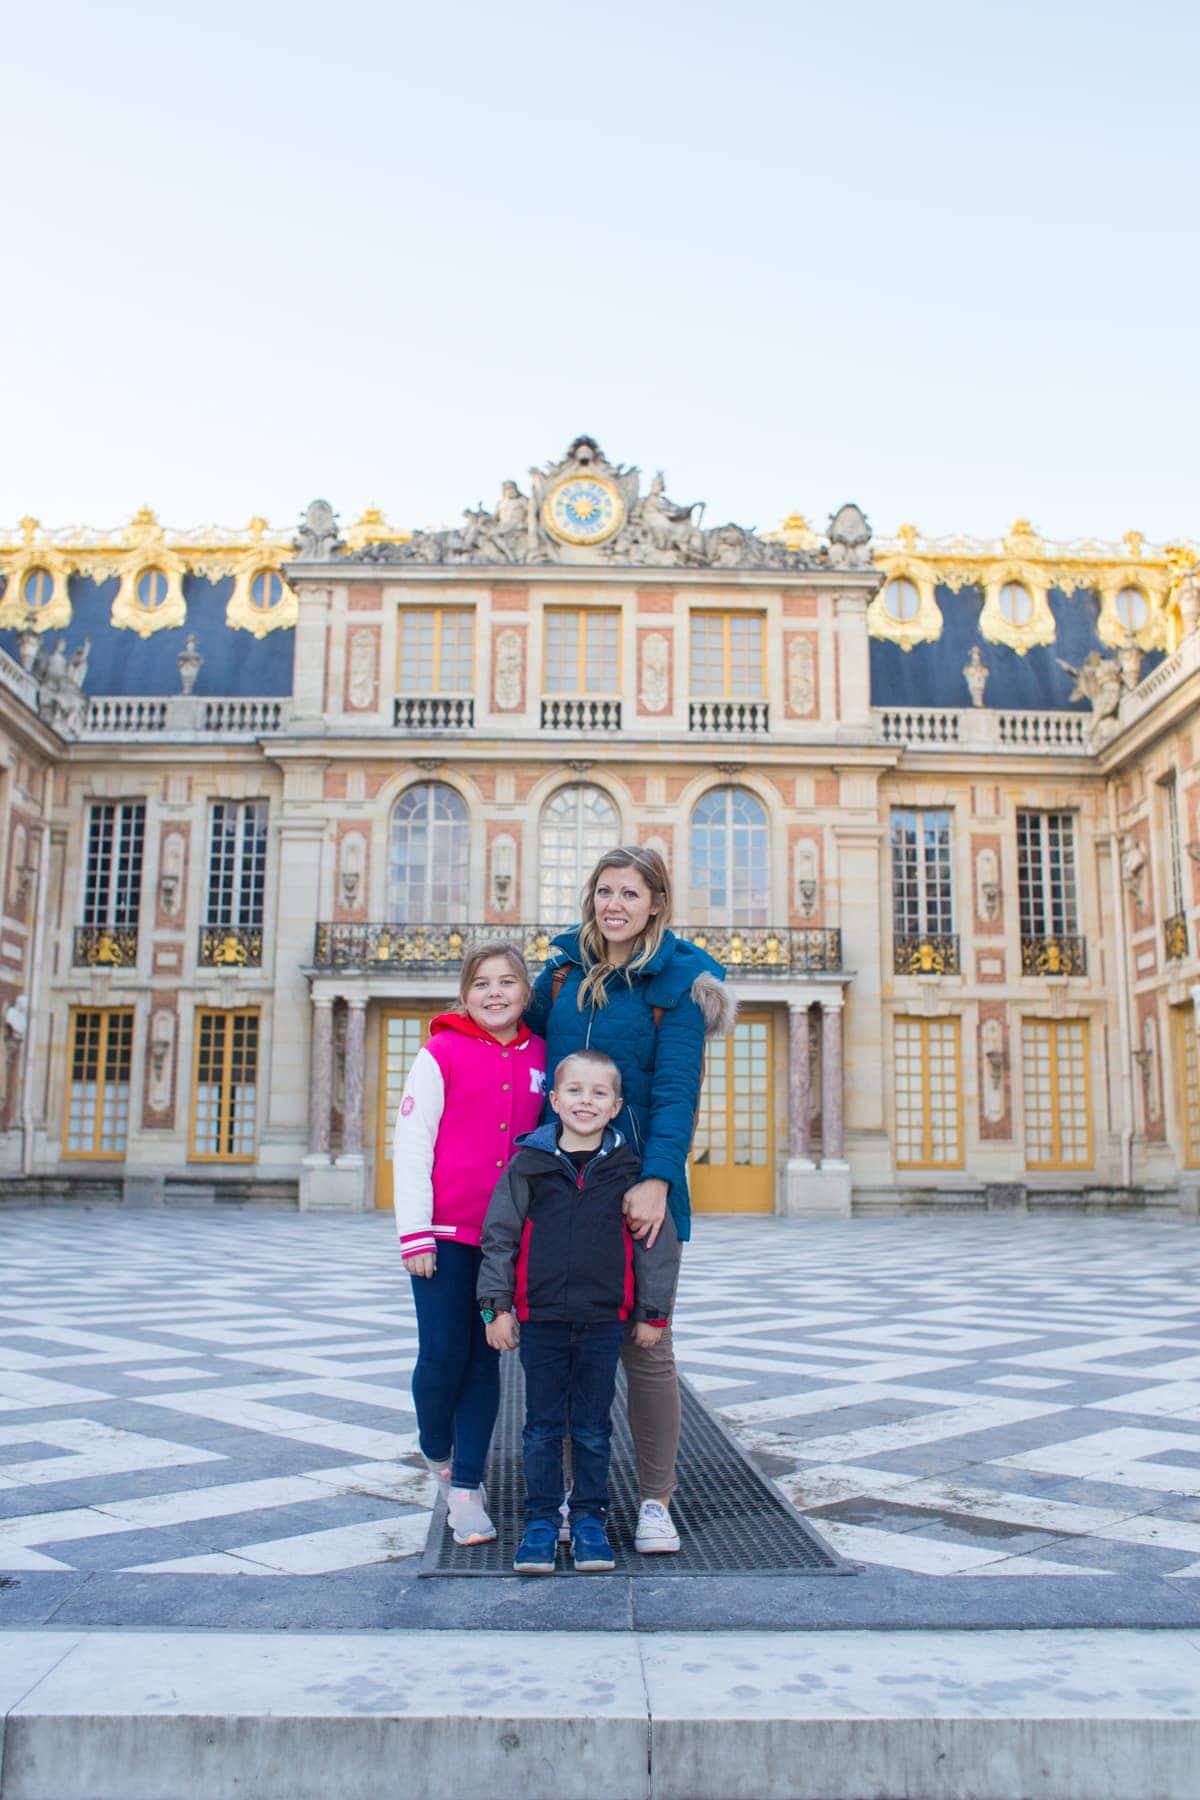 Lauren and kids in front of palace